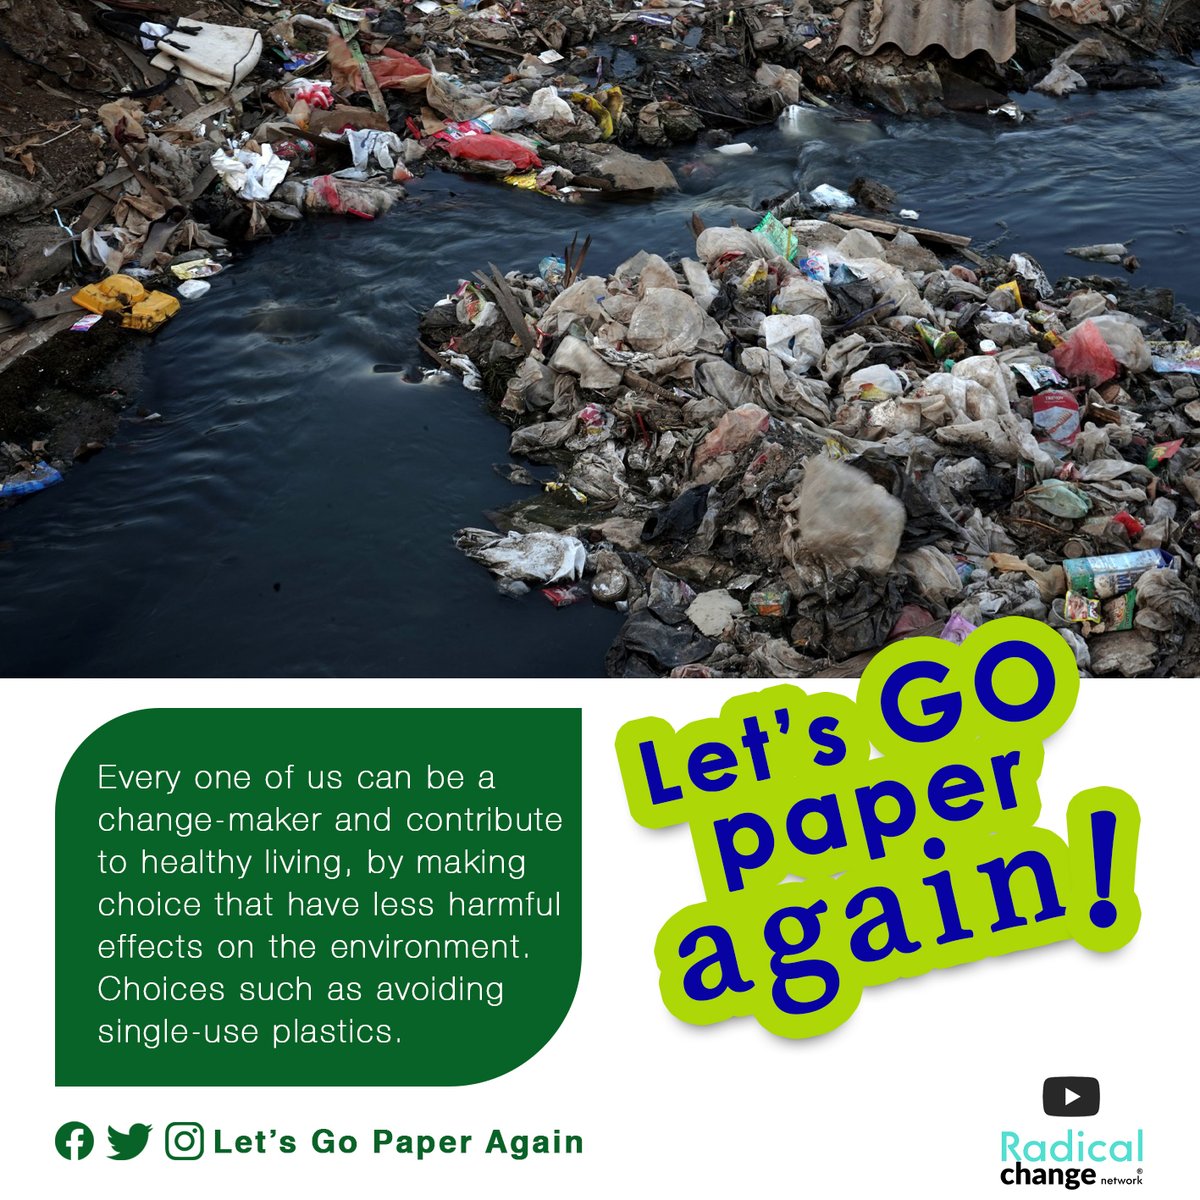 Every one of us can be a change-maker and contribute to healthy living, by making choices that have less harmful effects on the environment. Choices such as avoiding single-use plastics.#radicalchange #letsgopaperagaingh #accrafloods #endsingleuseplastic #savetheplanet